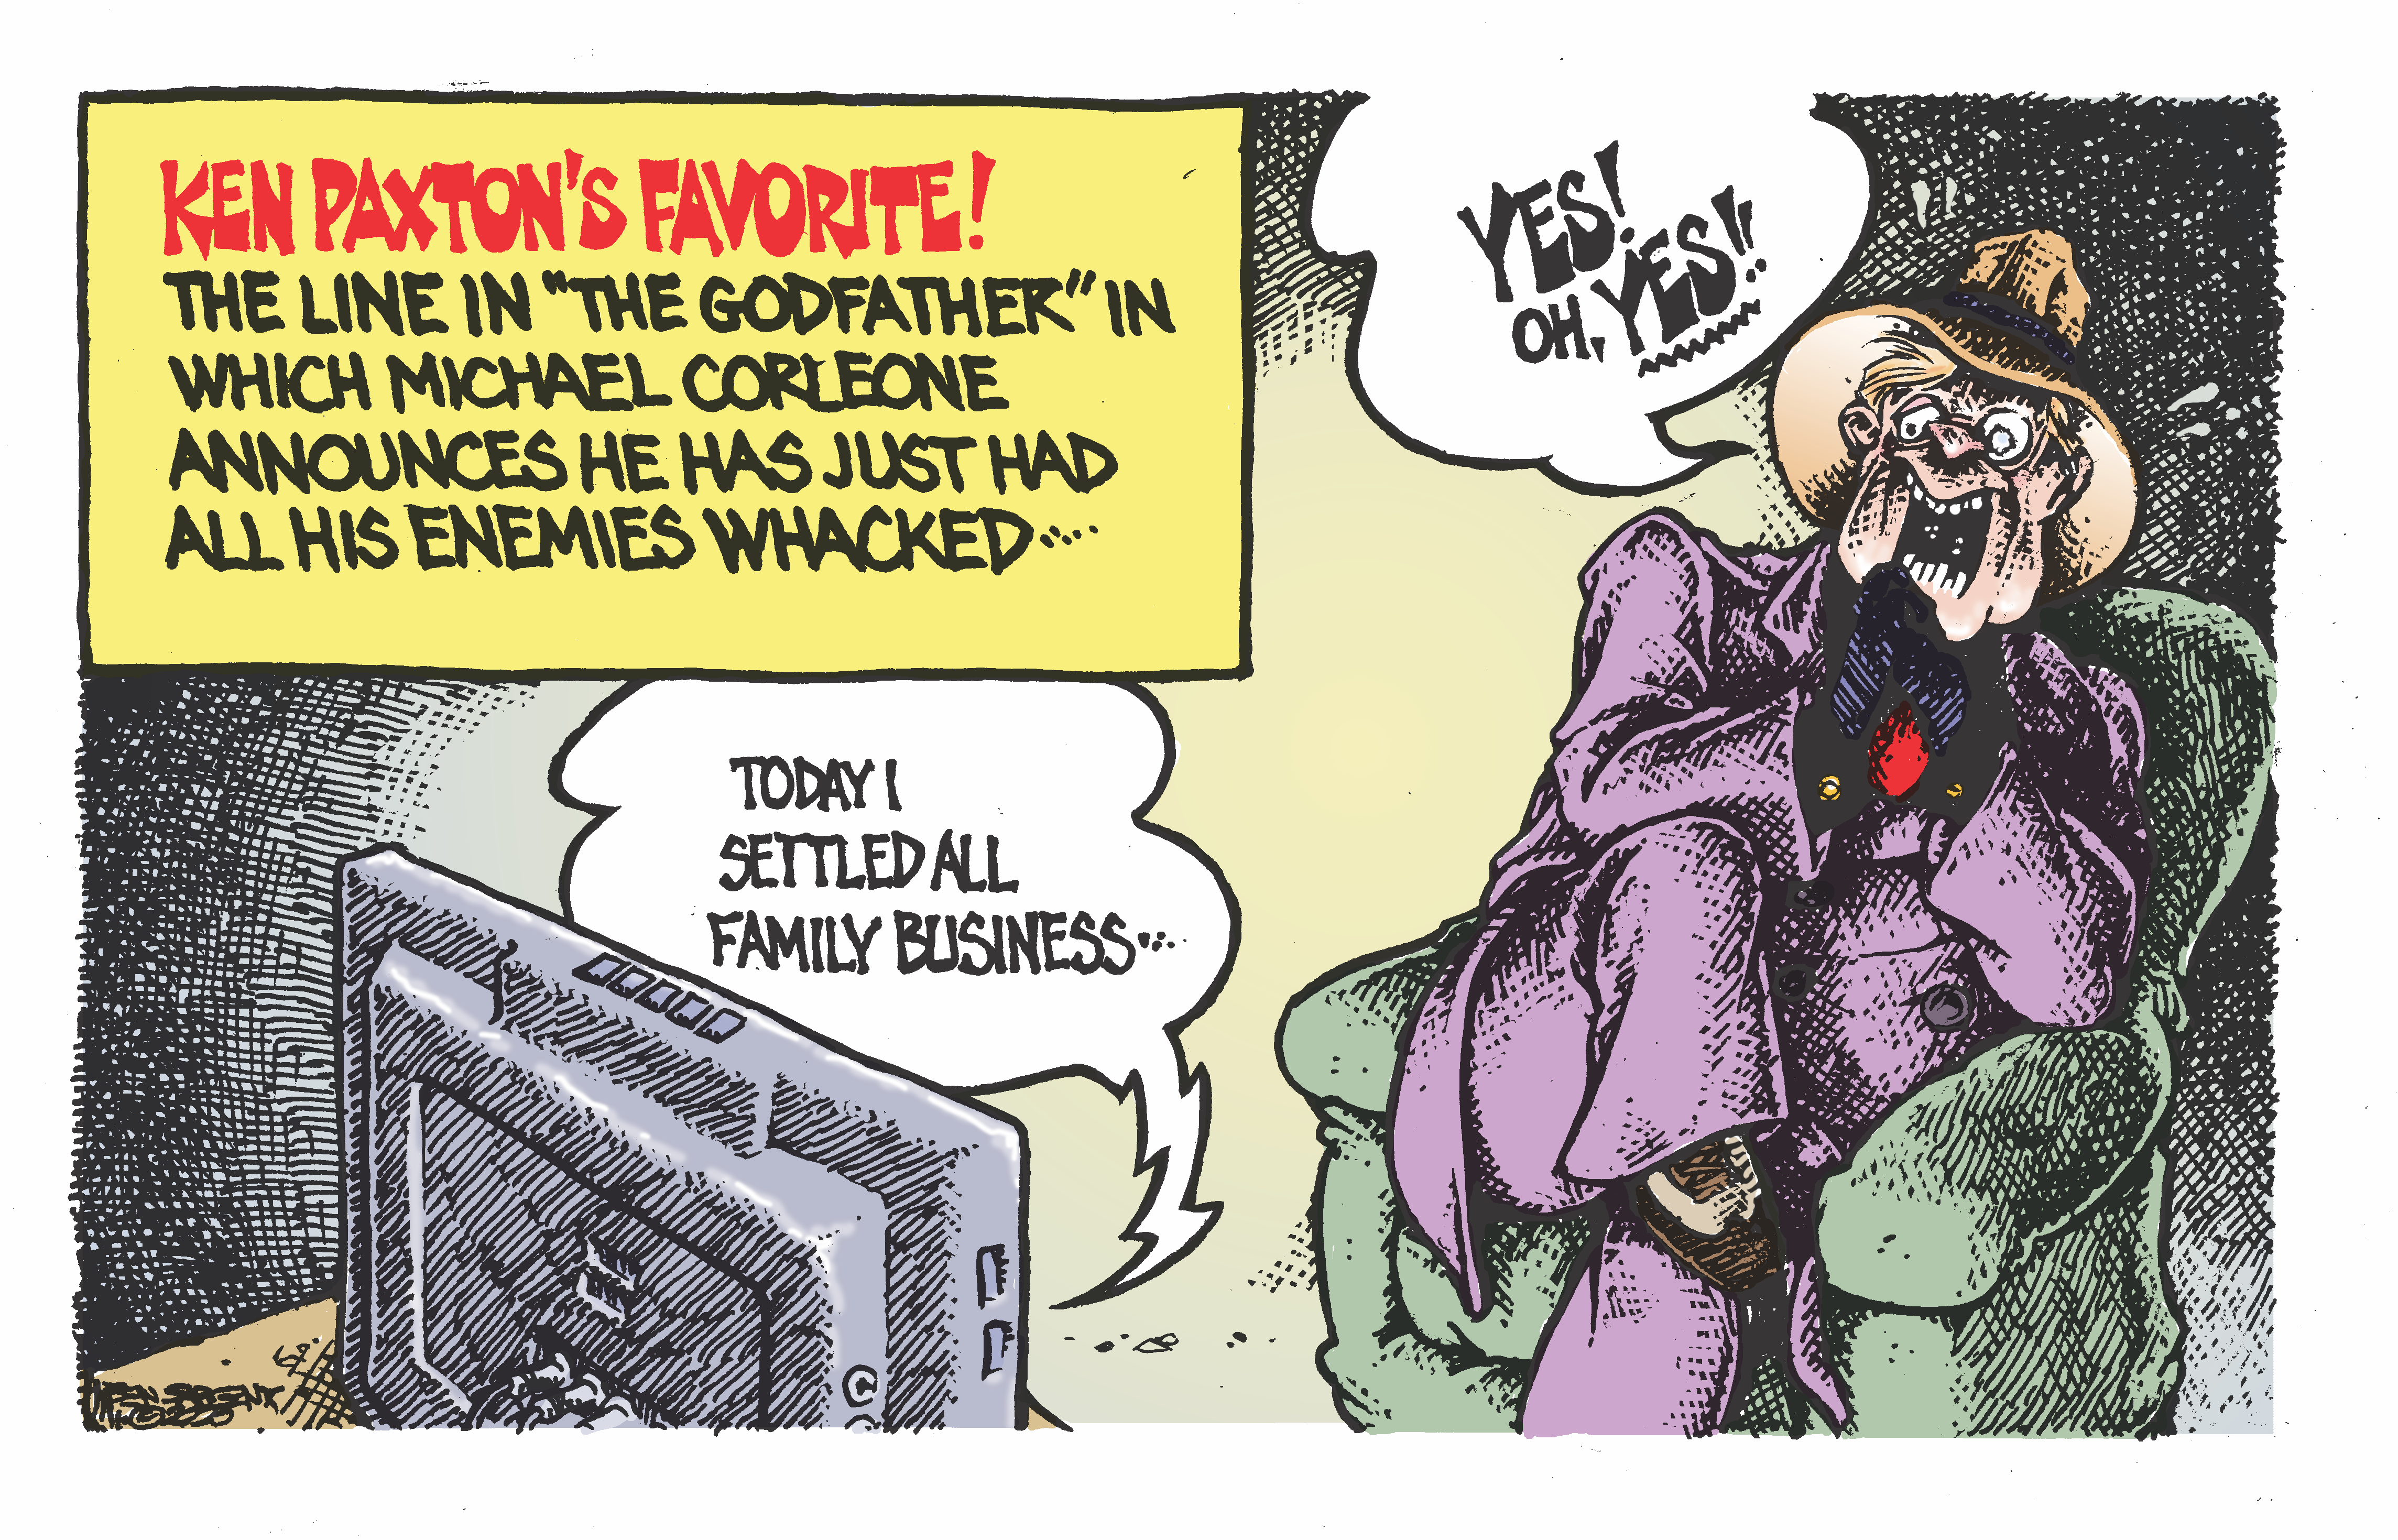 A cartoon depicts Ken Paxton watching The Godfather on TV, wearing a mafia-style ostentatious purple suit and fedora hat. On TV, Michael Corleone is saying, "Today, I settled all family business..." As Ken Paxton reacts with utter glee, "Yes! Oh YES!!" Caption: Ken Paxton's favorite! The line in "The Godfather" in which Michael Corleone announces he has just had all his enemies whacked ..."